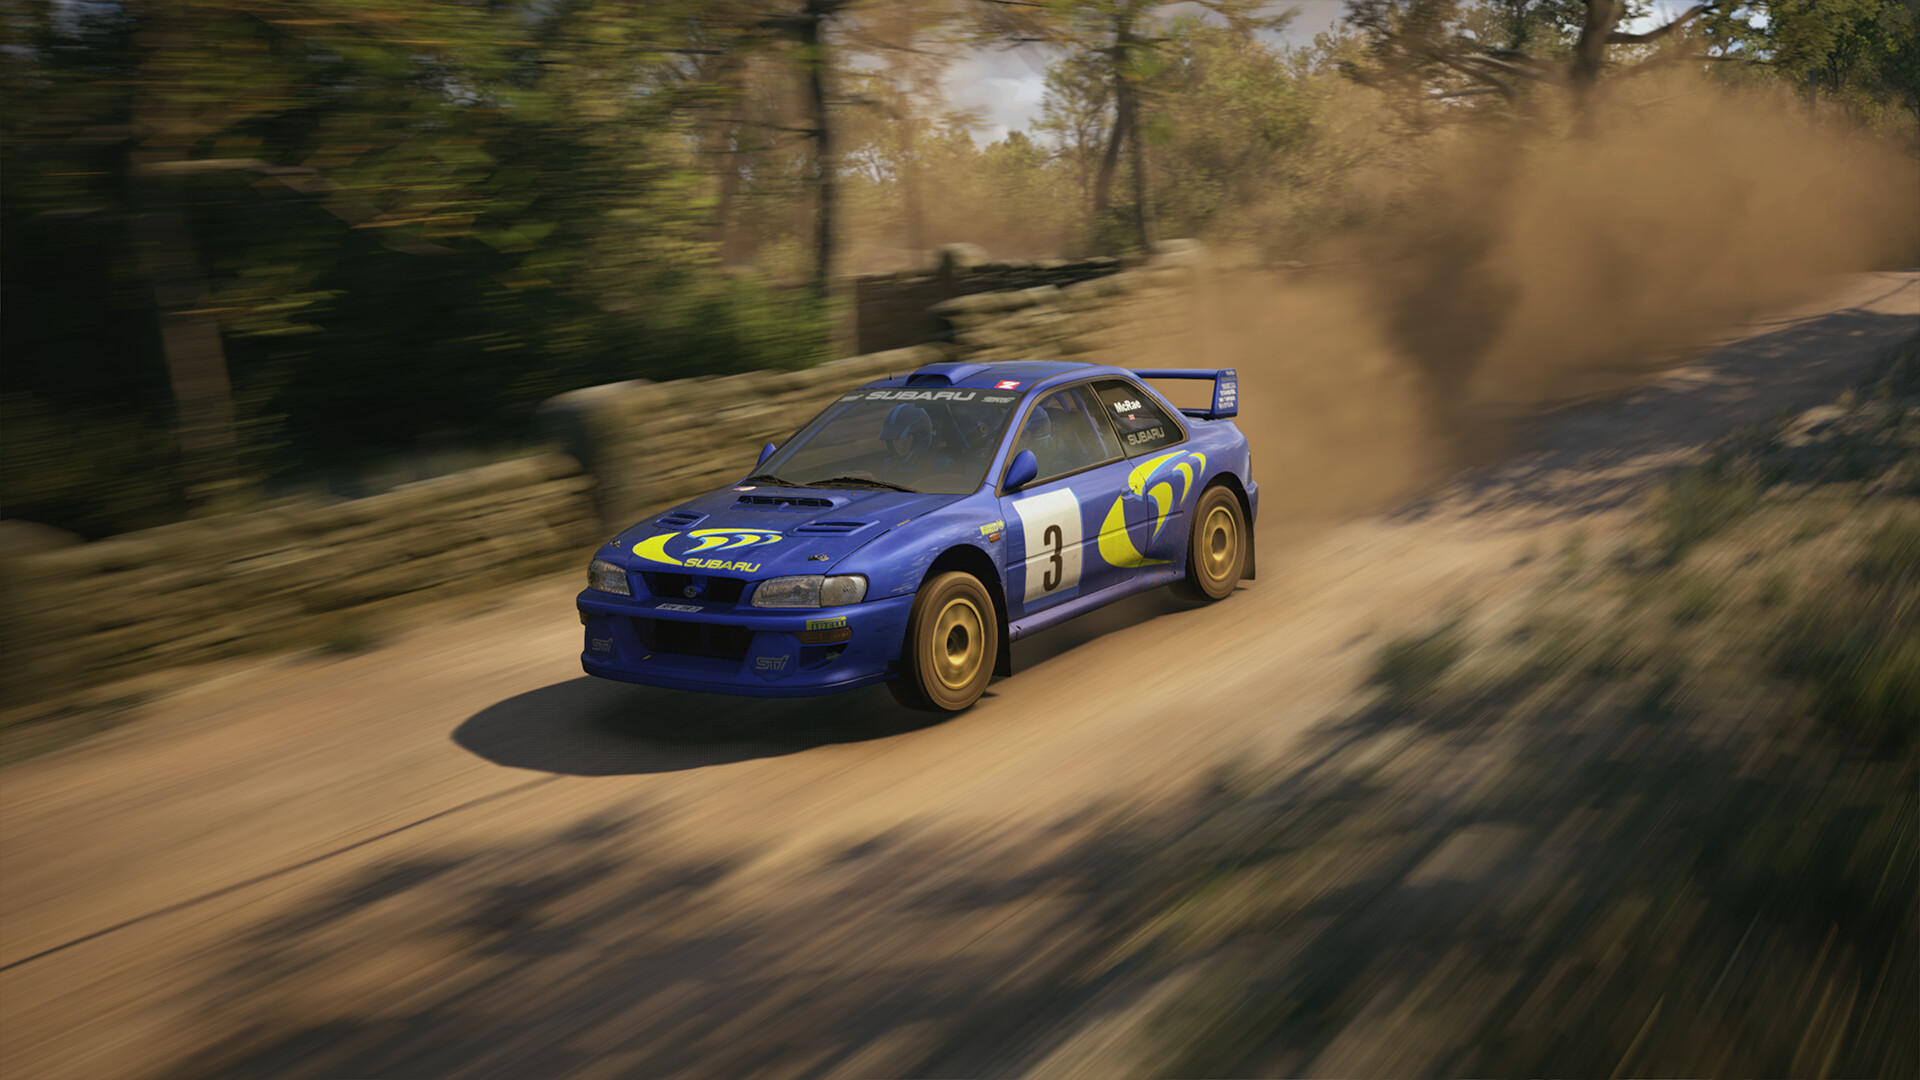 DiRT Rally 2.0 Season 3 and 4 content detailed as the Estering drops in